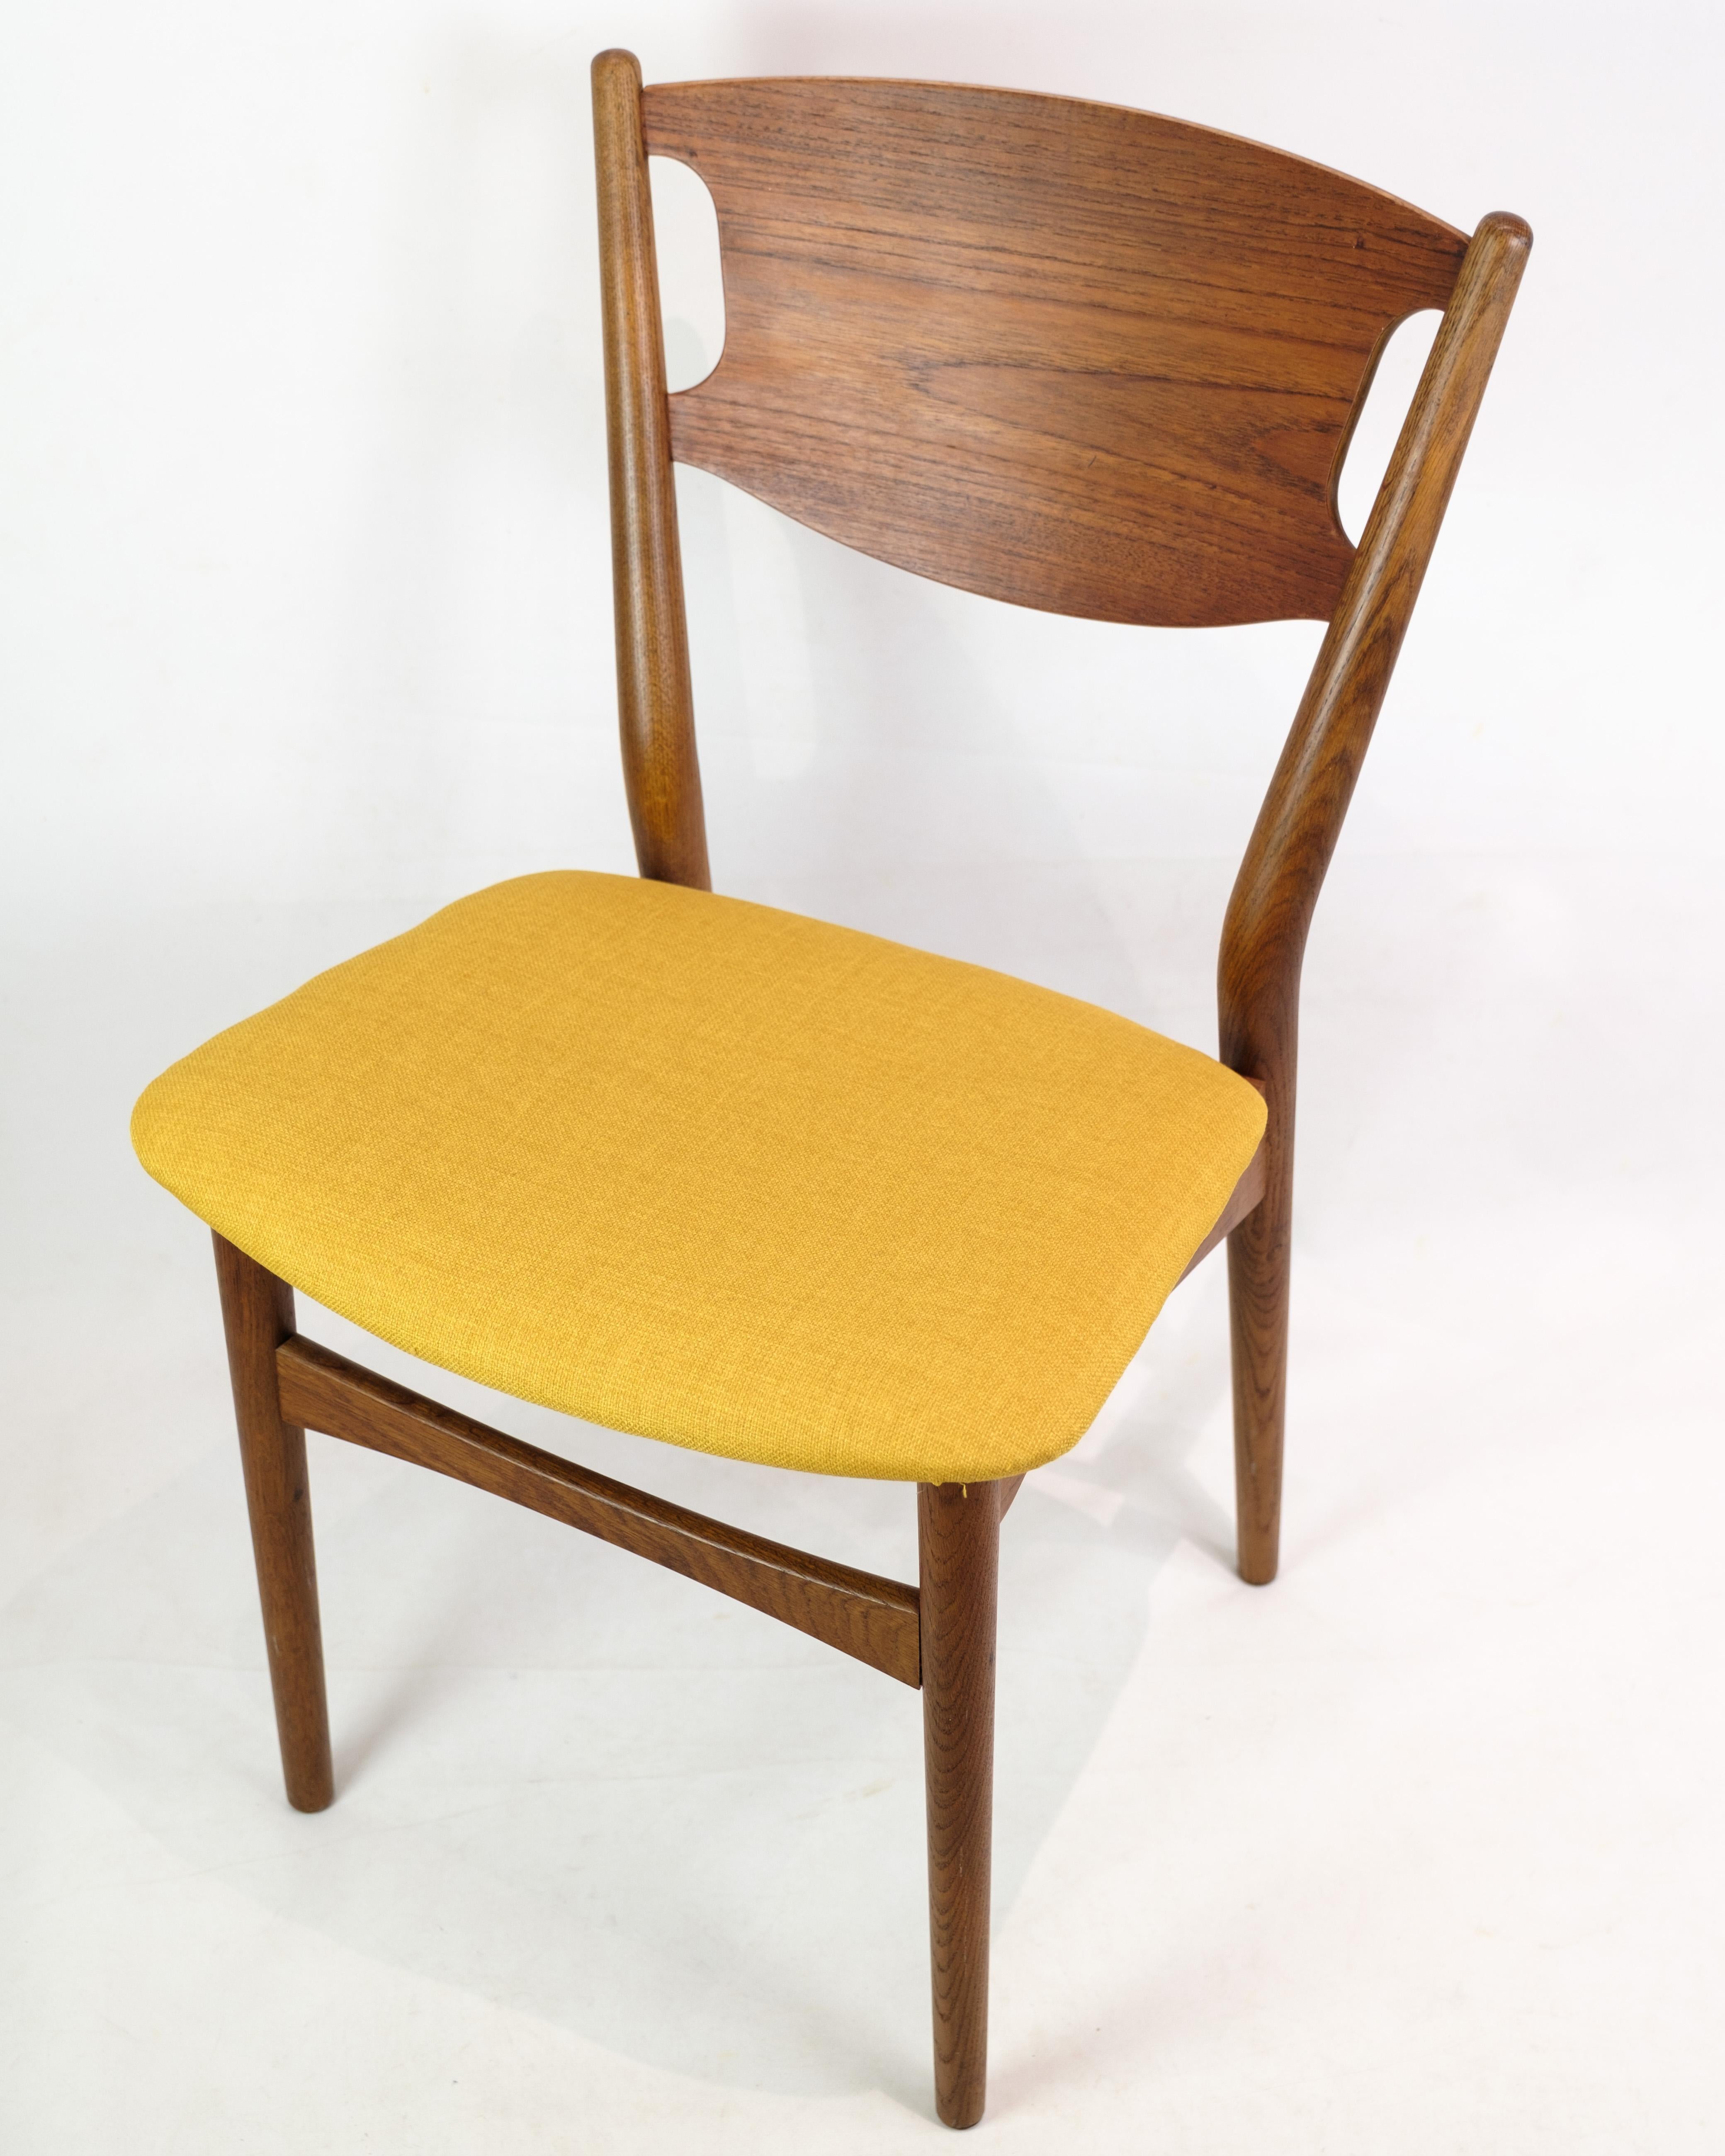 4 Dining Room Chairs, Danish Design, Teak Wood, Fabric Cover, 1960 For Sale 5